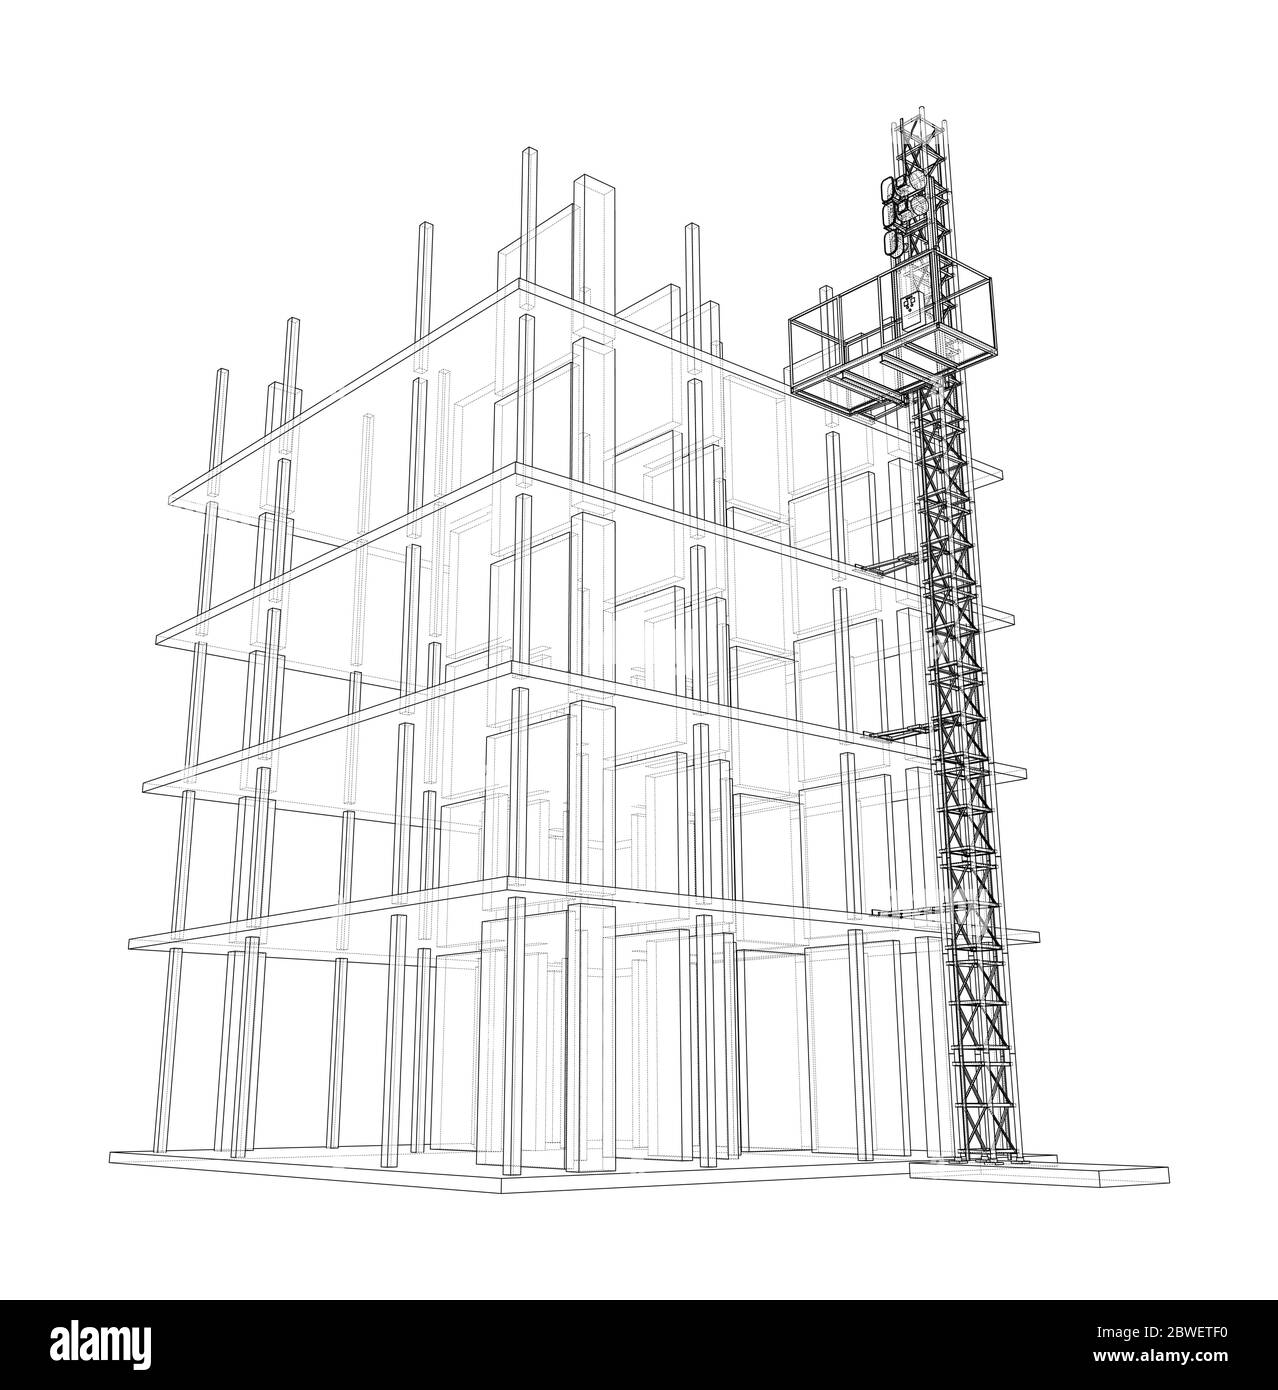 Building under construction with mast lifts Stock Vector